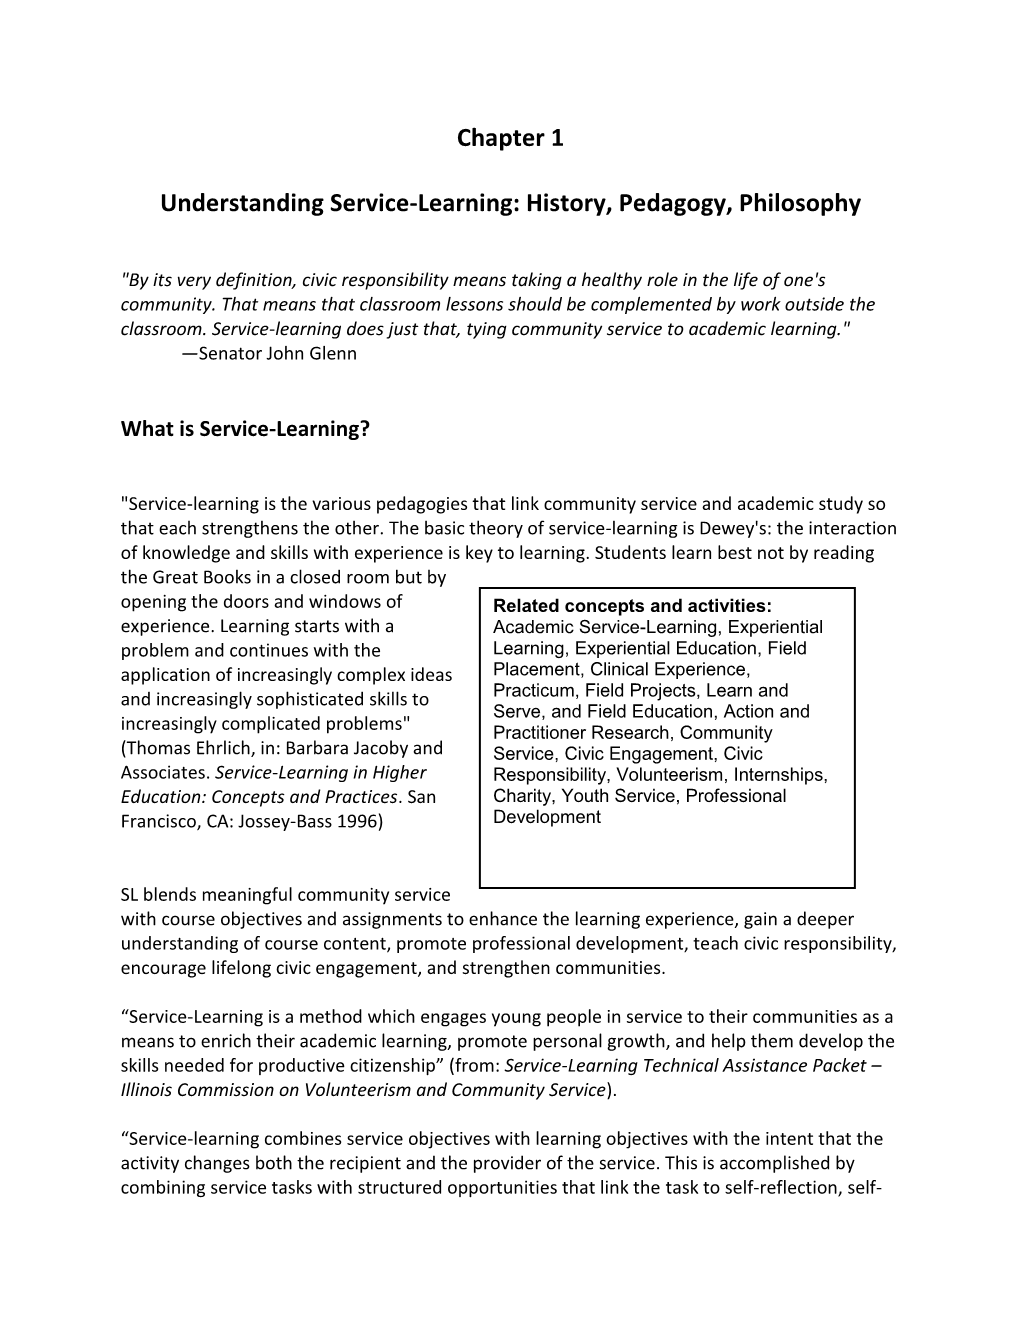 Chapter 1 Understanding Service-Learning